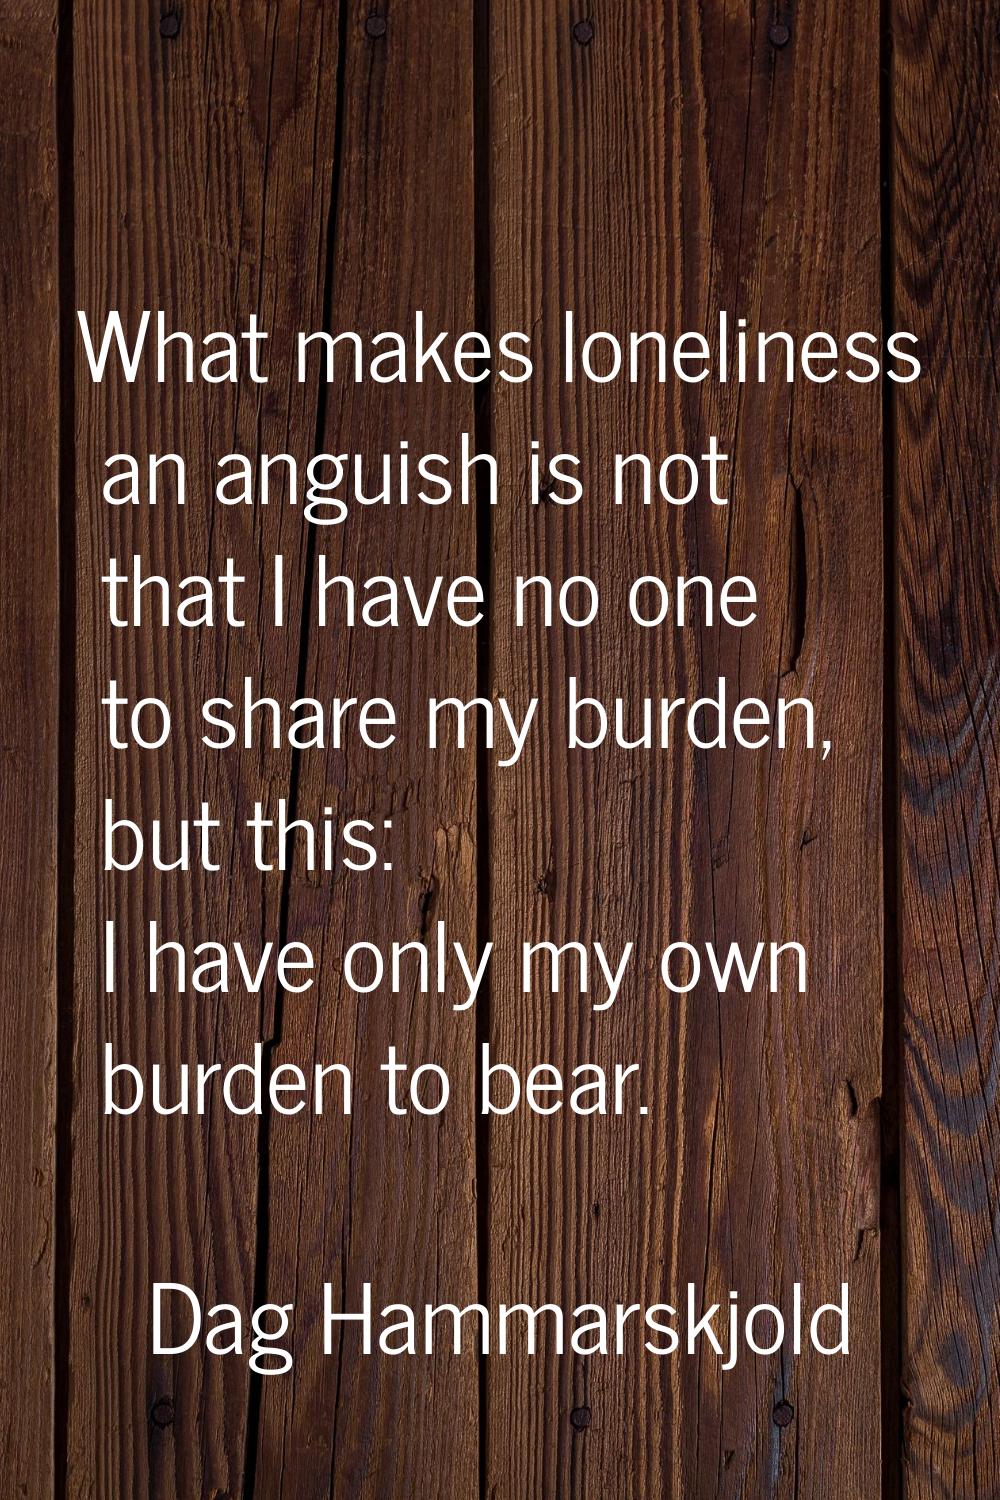 What makes loneliness an anguish is not that I have no one to share my burden, but this: I have onl